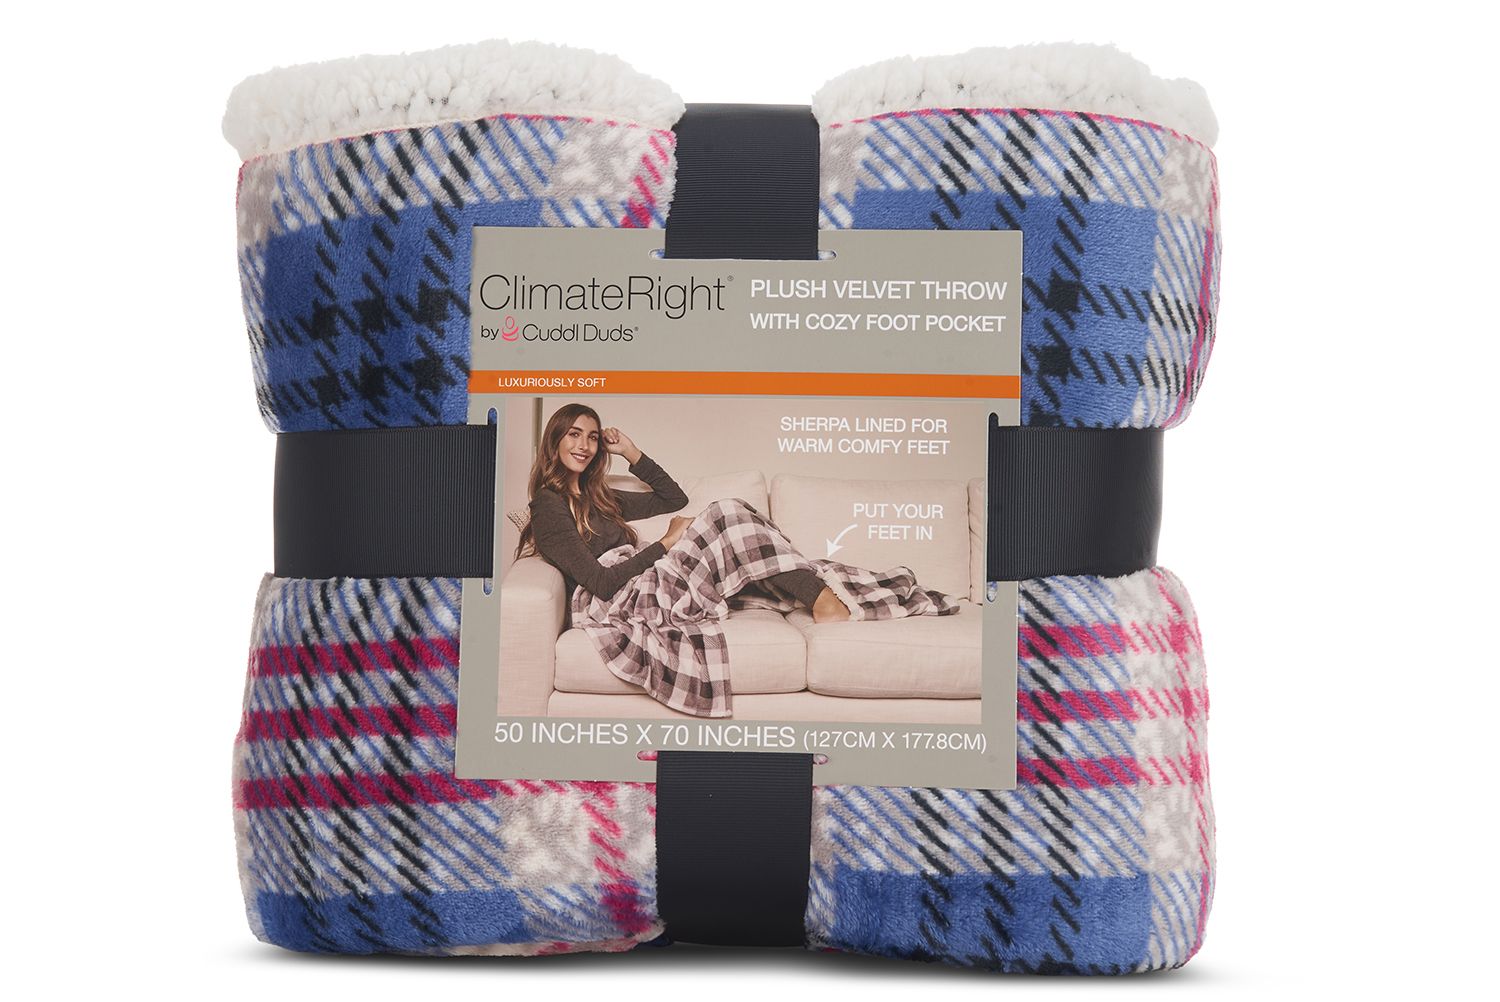 ClimateRight by Cuddl Duds Oversized Throw With A Cozy Sherpa Pocket For Your Feet, Red/Blue Plaid - image 5 of 6